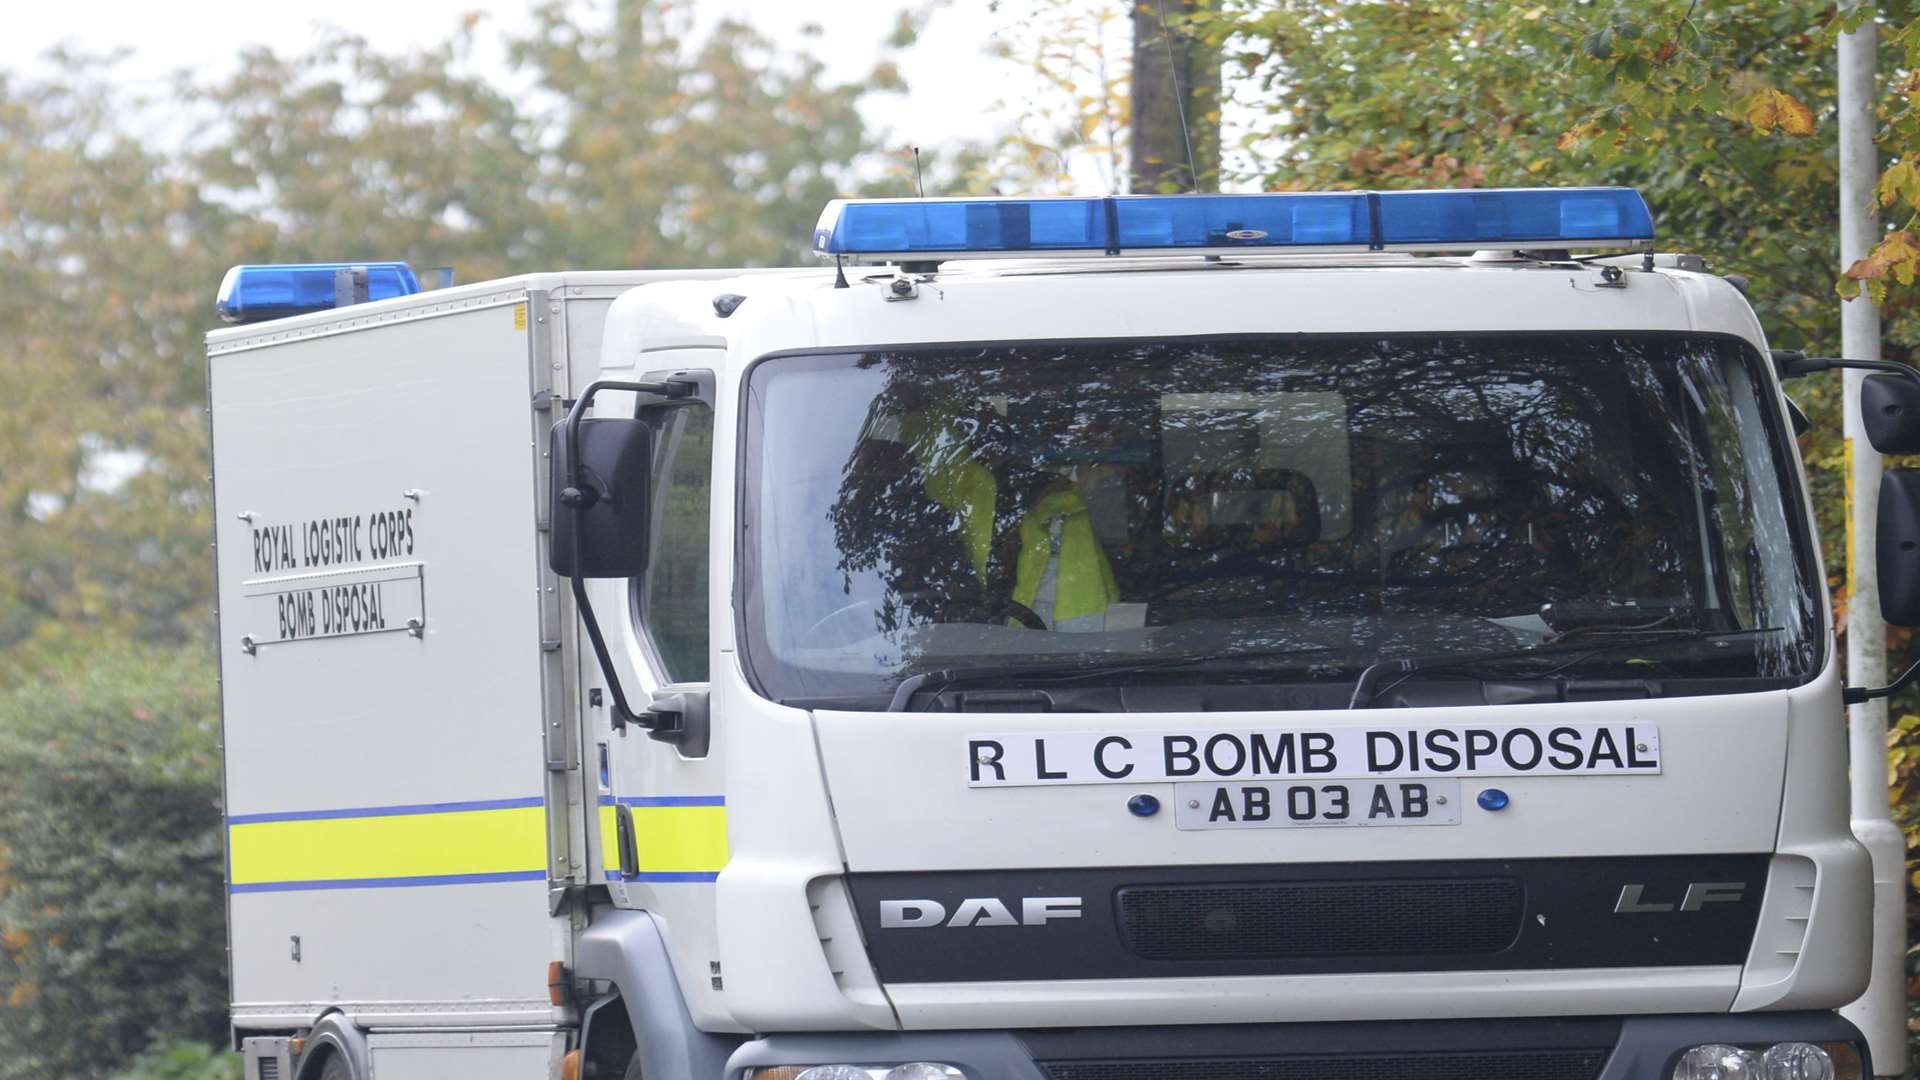 A bomb disposal team was called. Stock image.